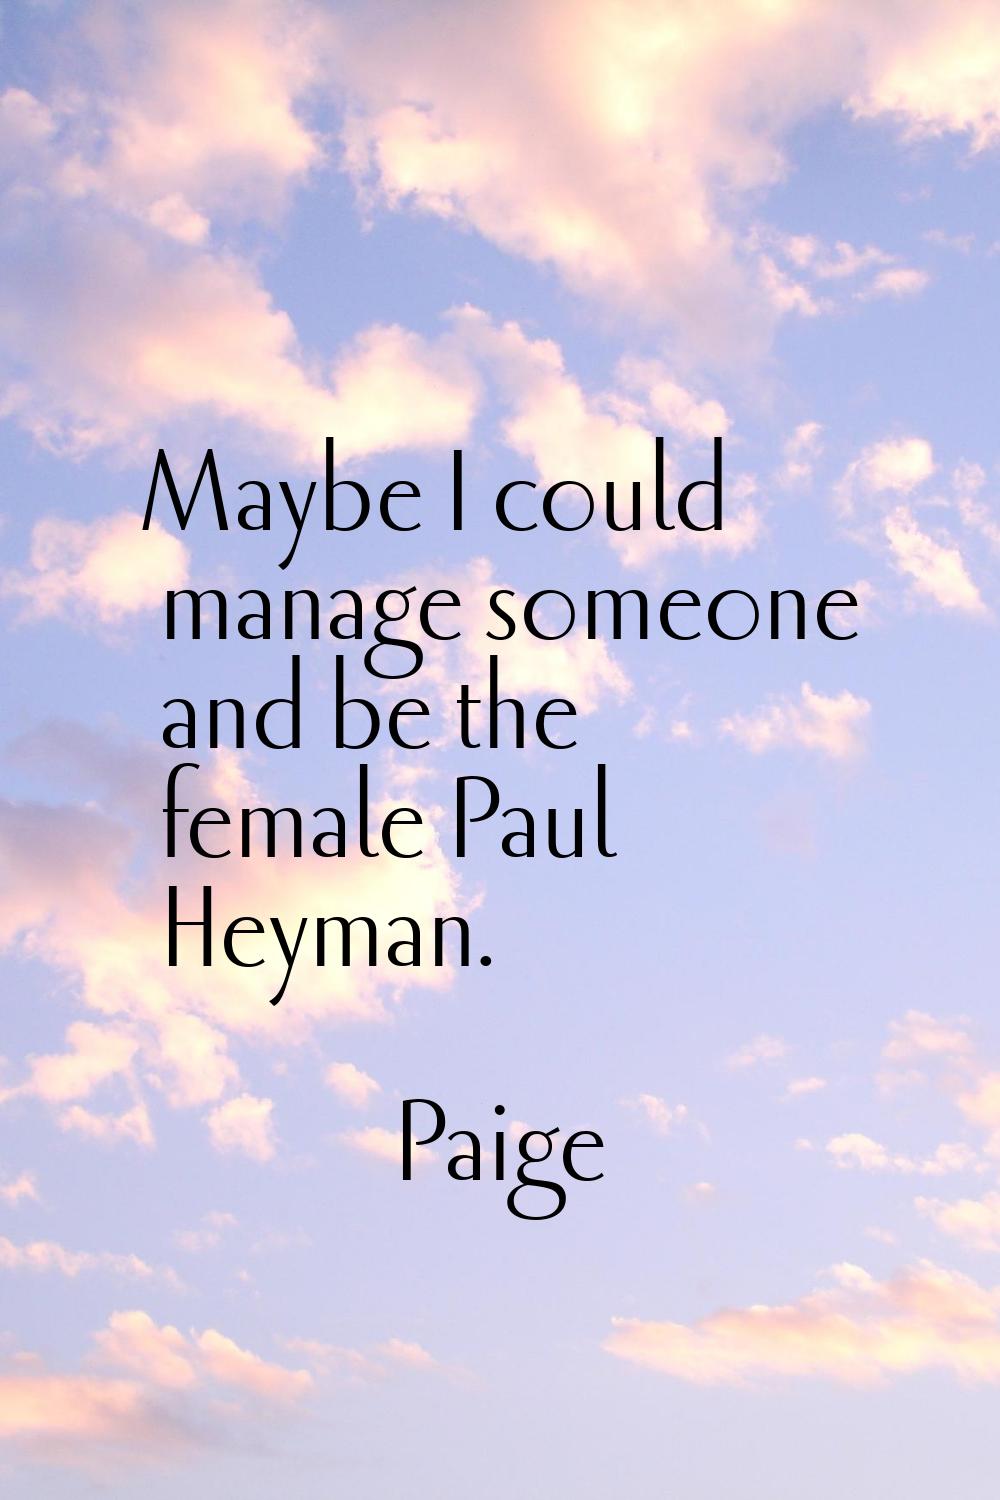 Maybe I could manage someone and be the female Paul Heyman.